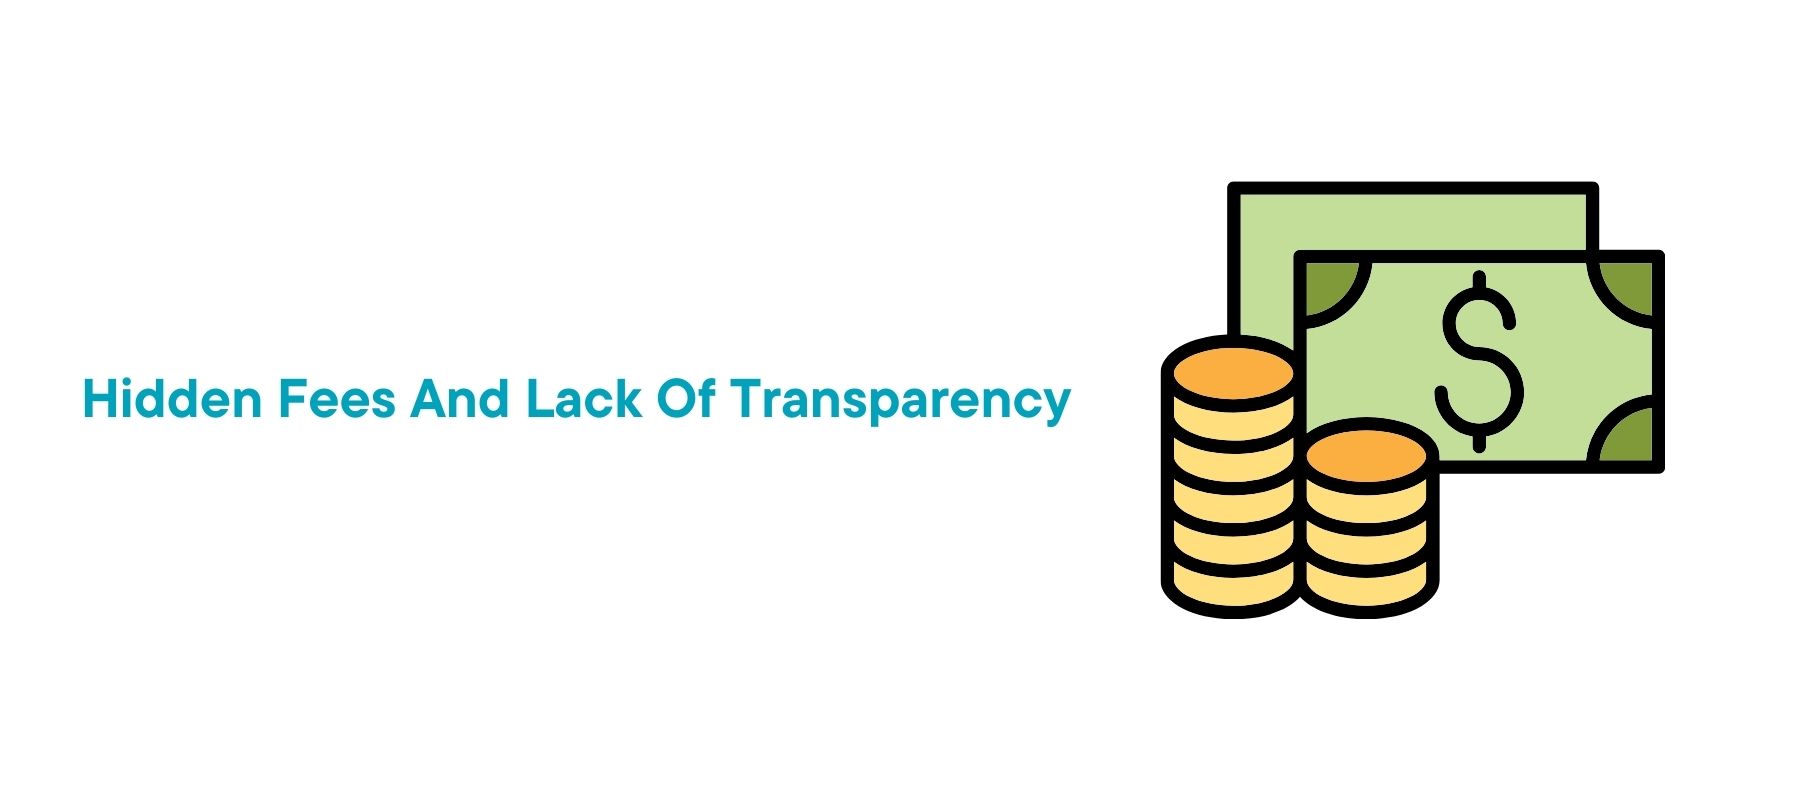 Hidden Fees And Lack Of Transparency